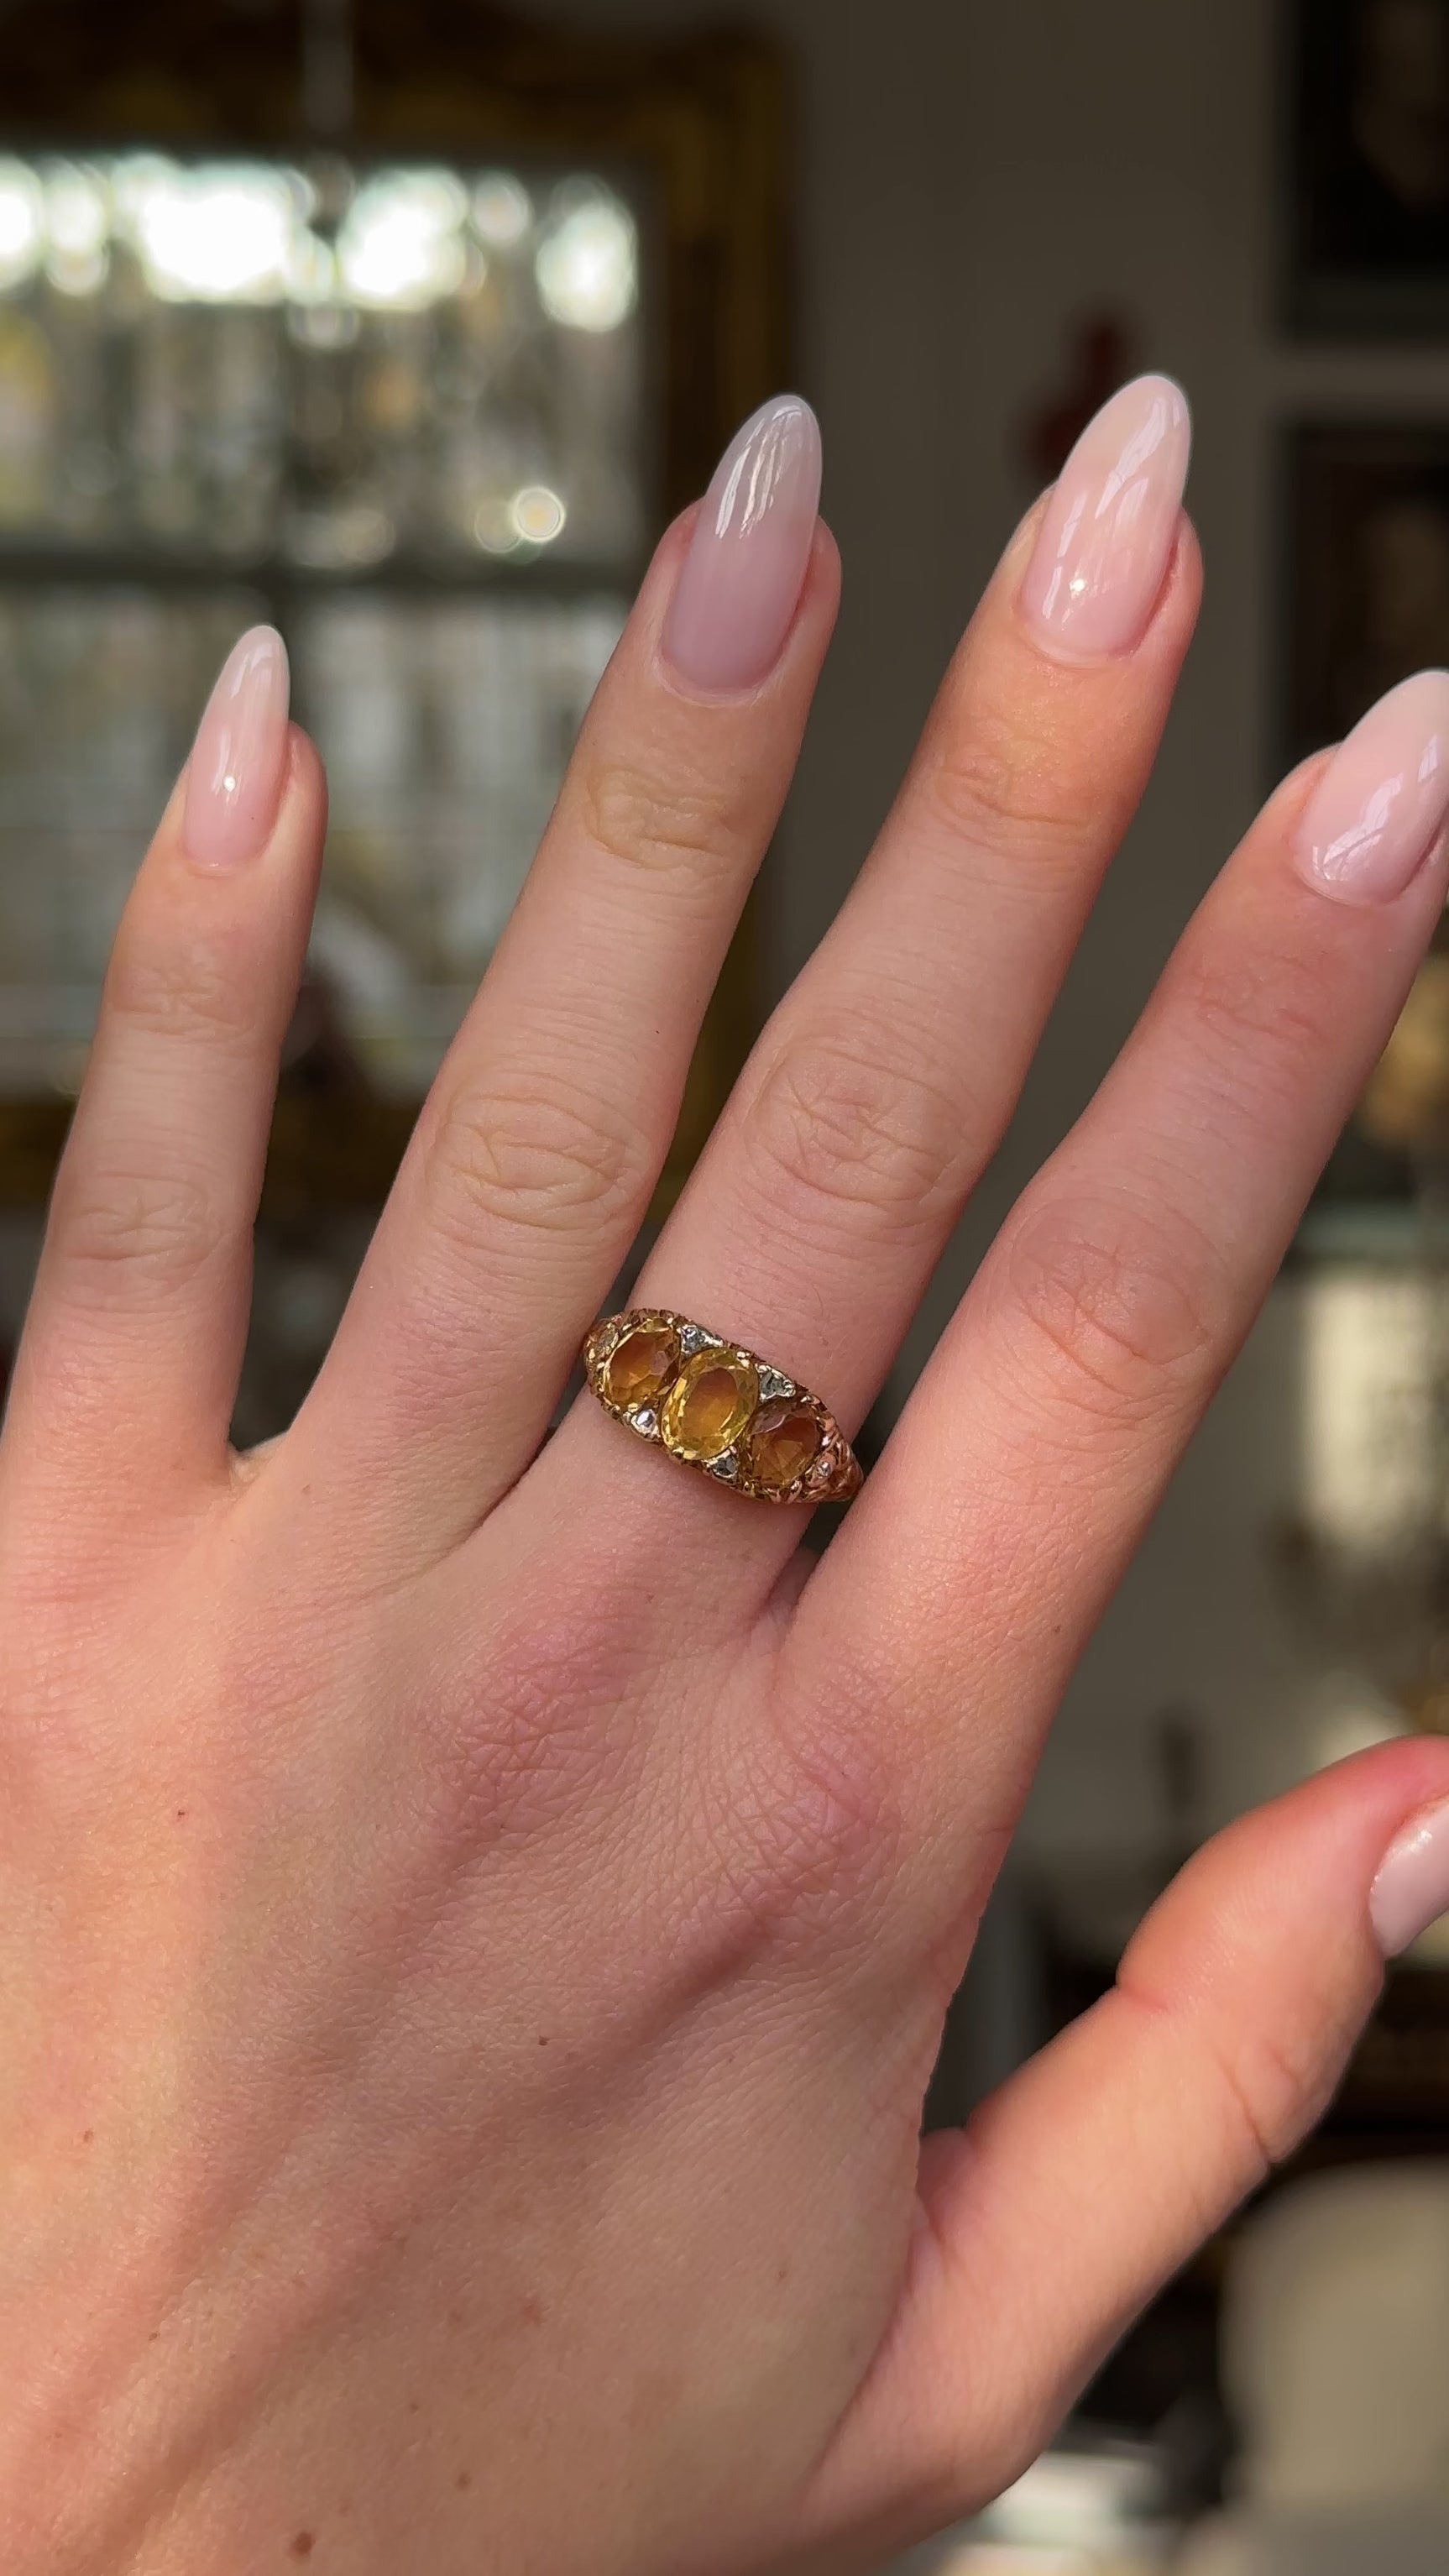 Three stone citrine ring worn on hand and moved around to give perspective.